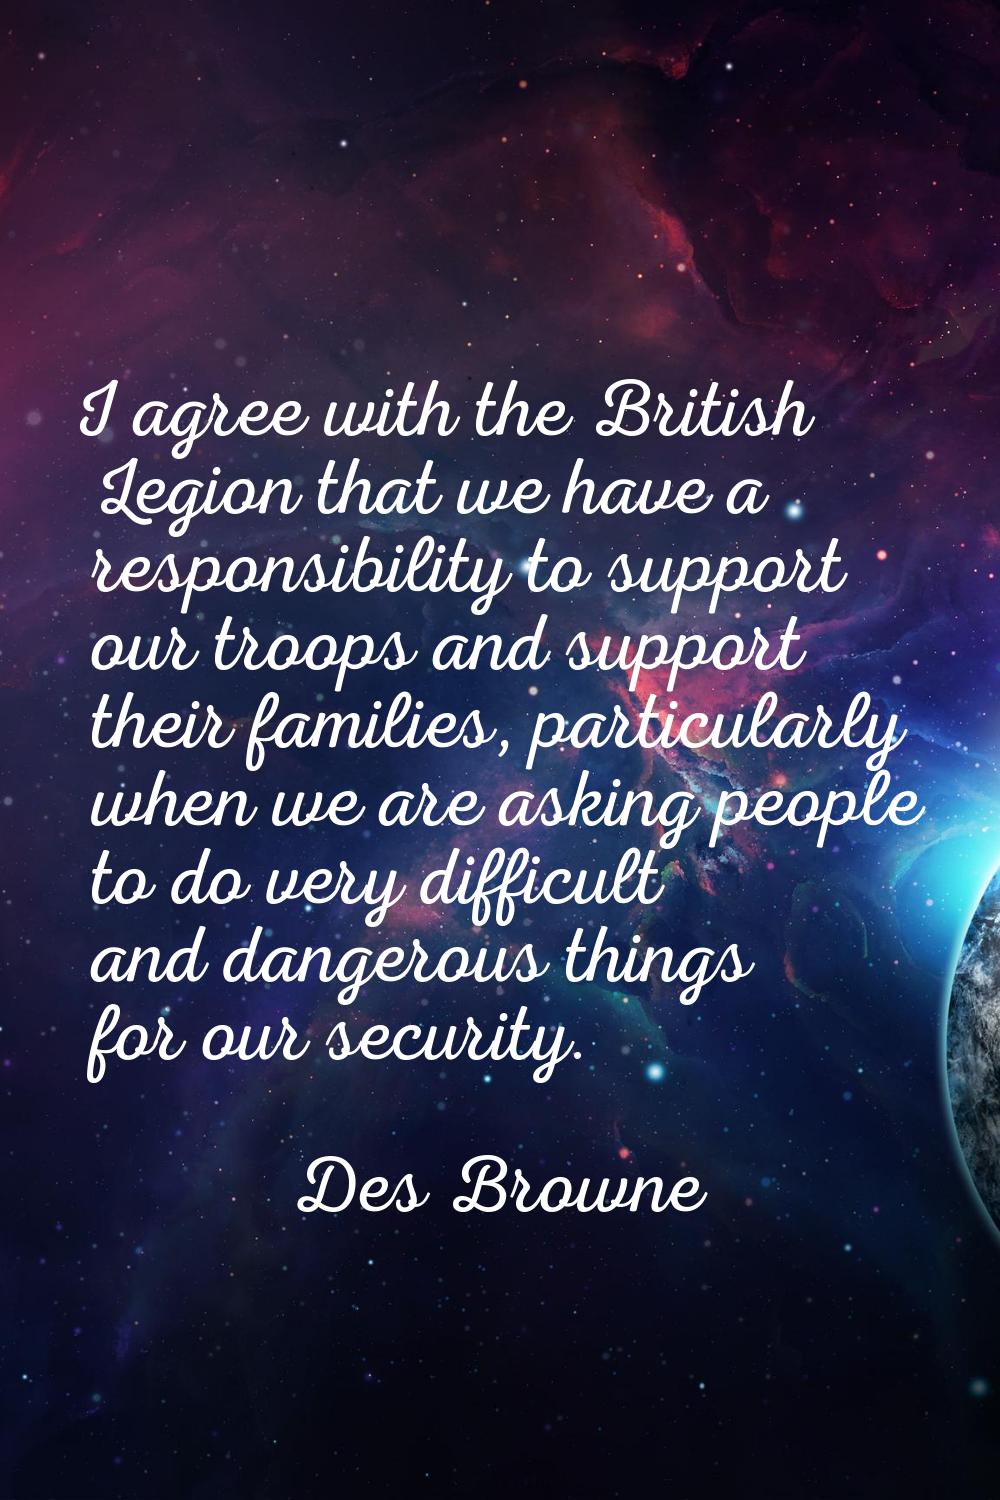 I agree with the British Legion that we have a responsibility to support our troops and support the